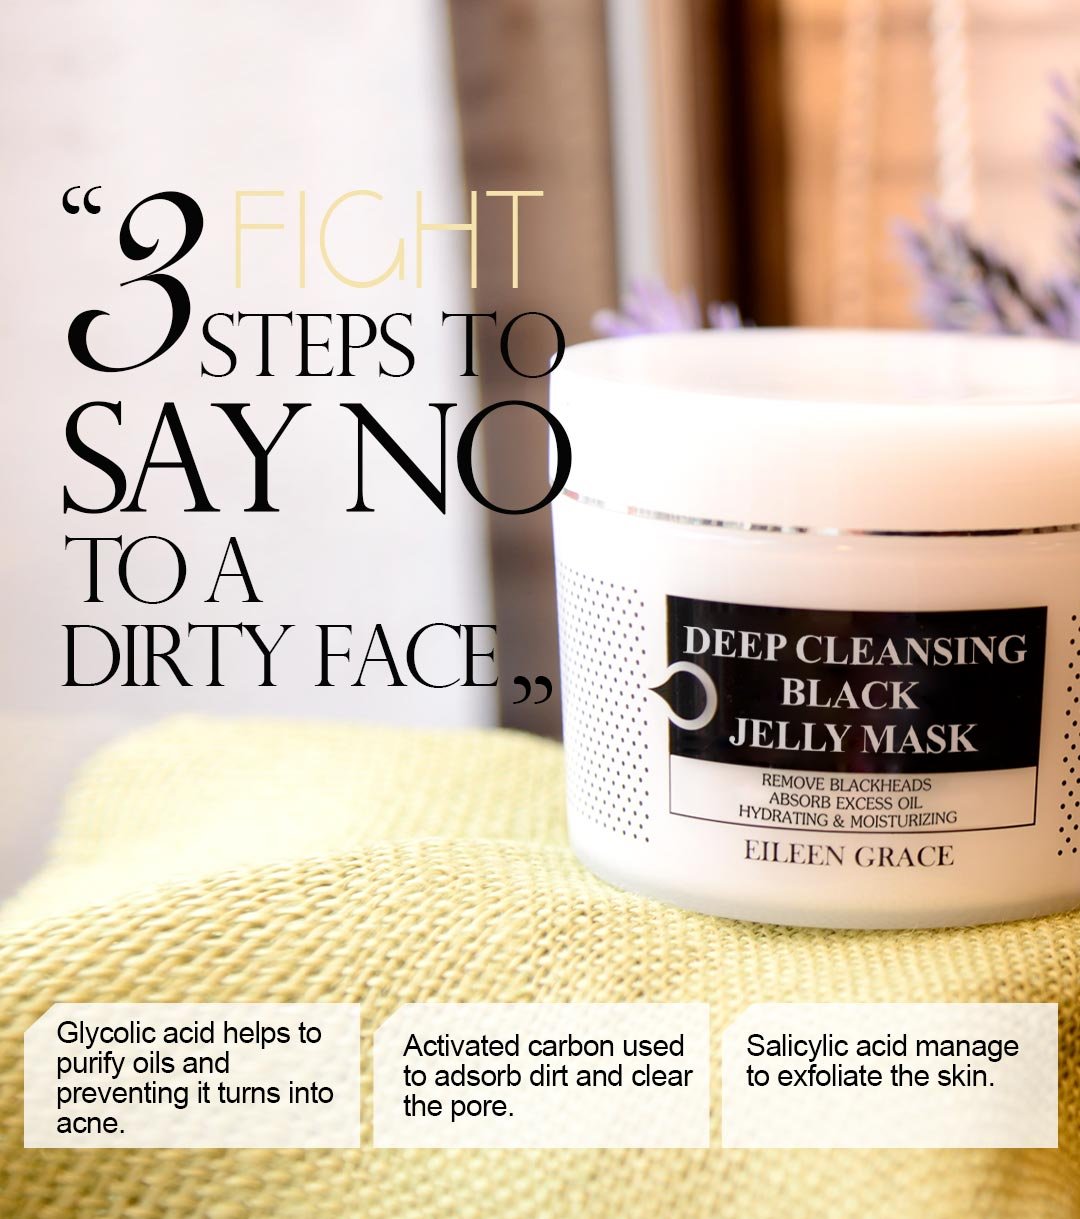 Jelly Mask Travel Pack - Step